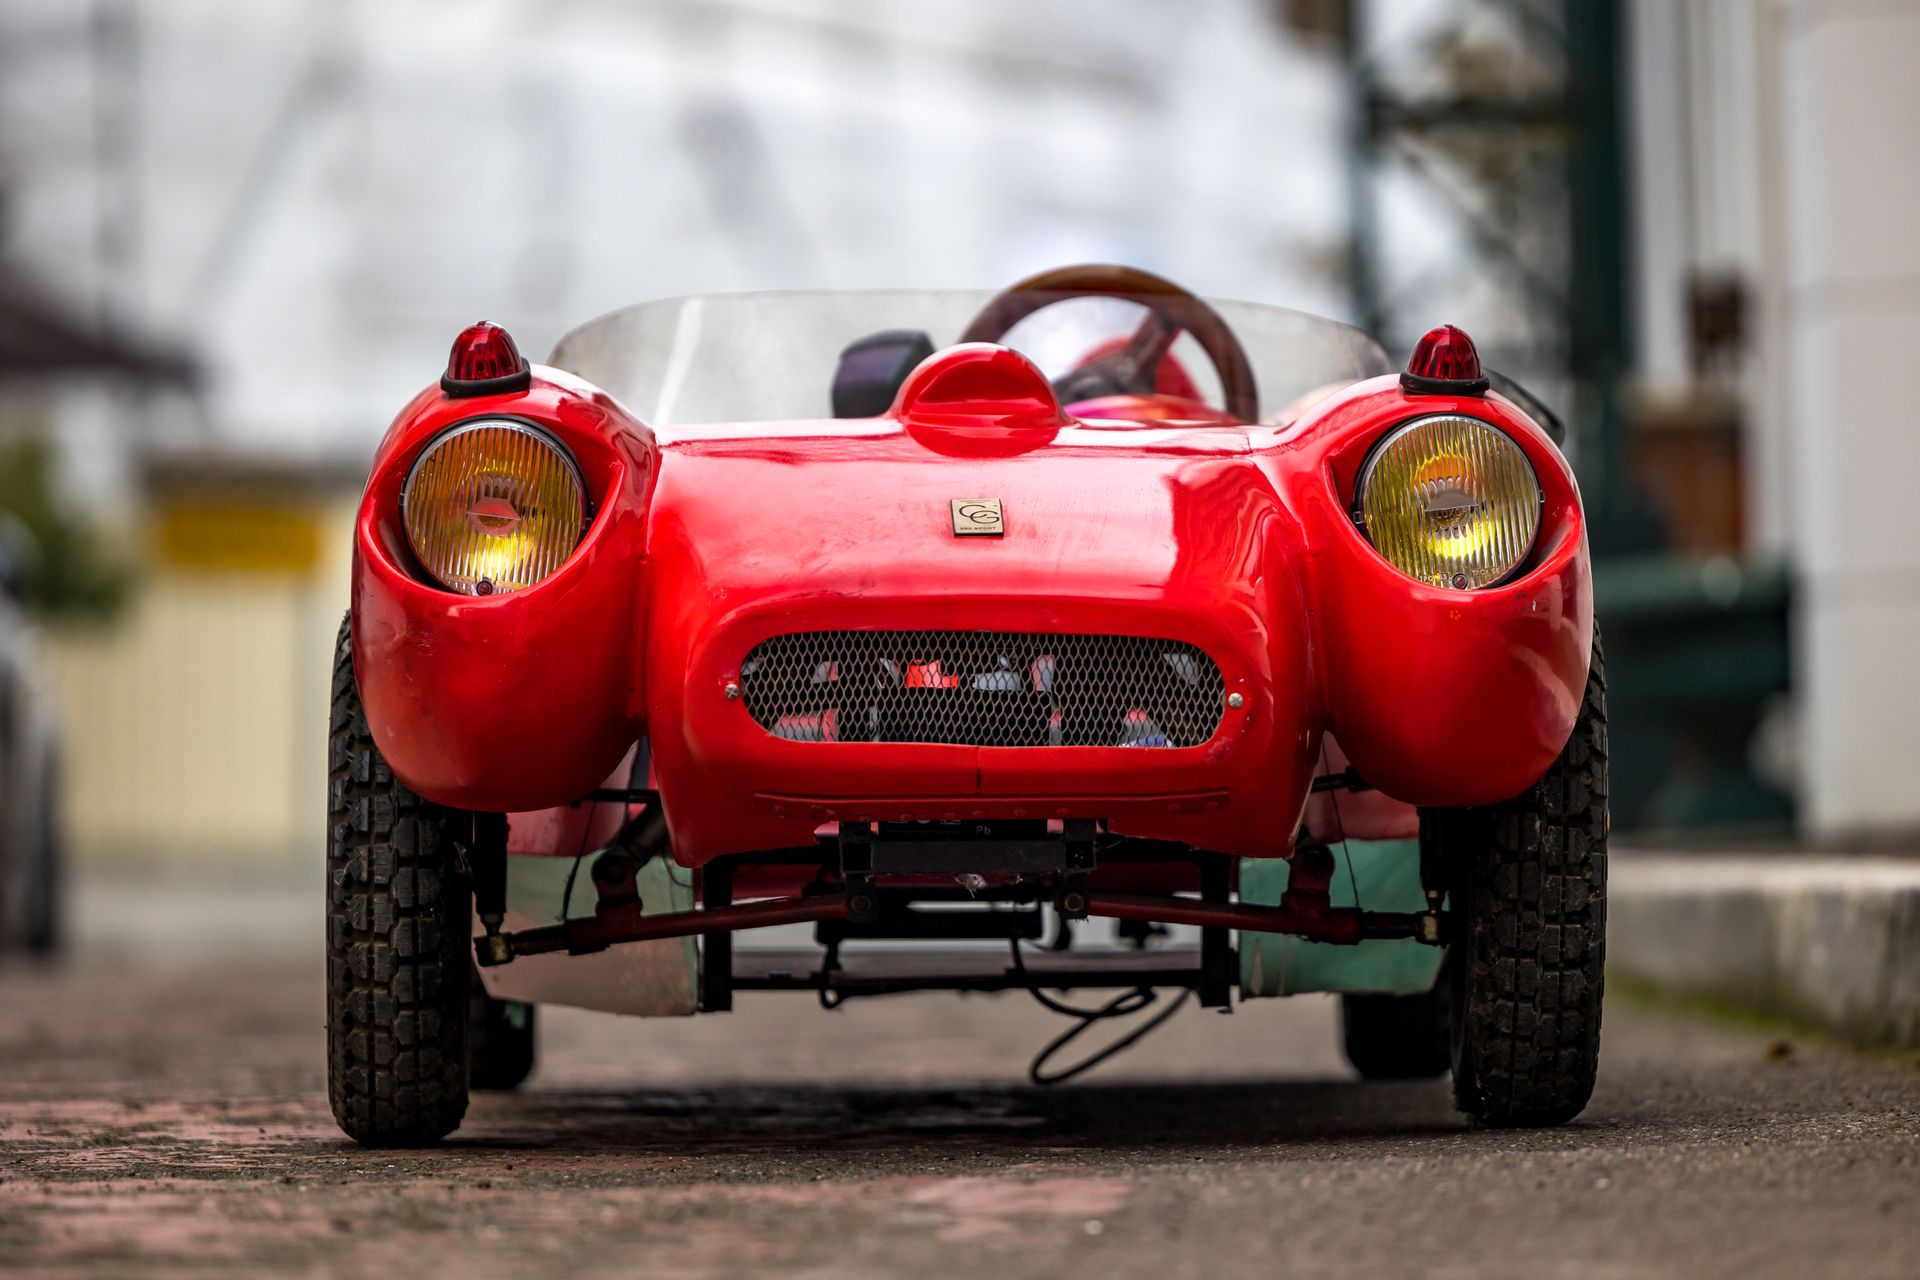 Null FERRARI 250 TR
Carriage C.G. (Guy Chappaz)
"The smallest manufacturer in Fr&hellip;